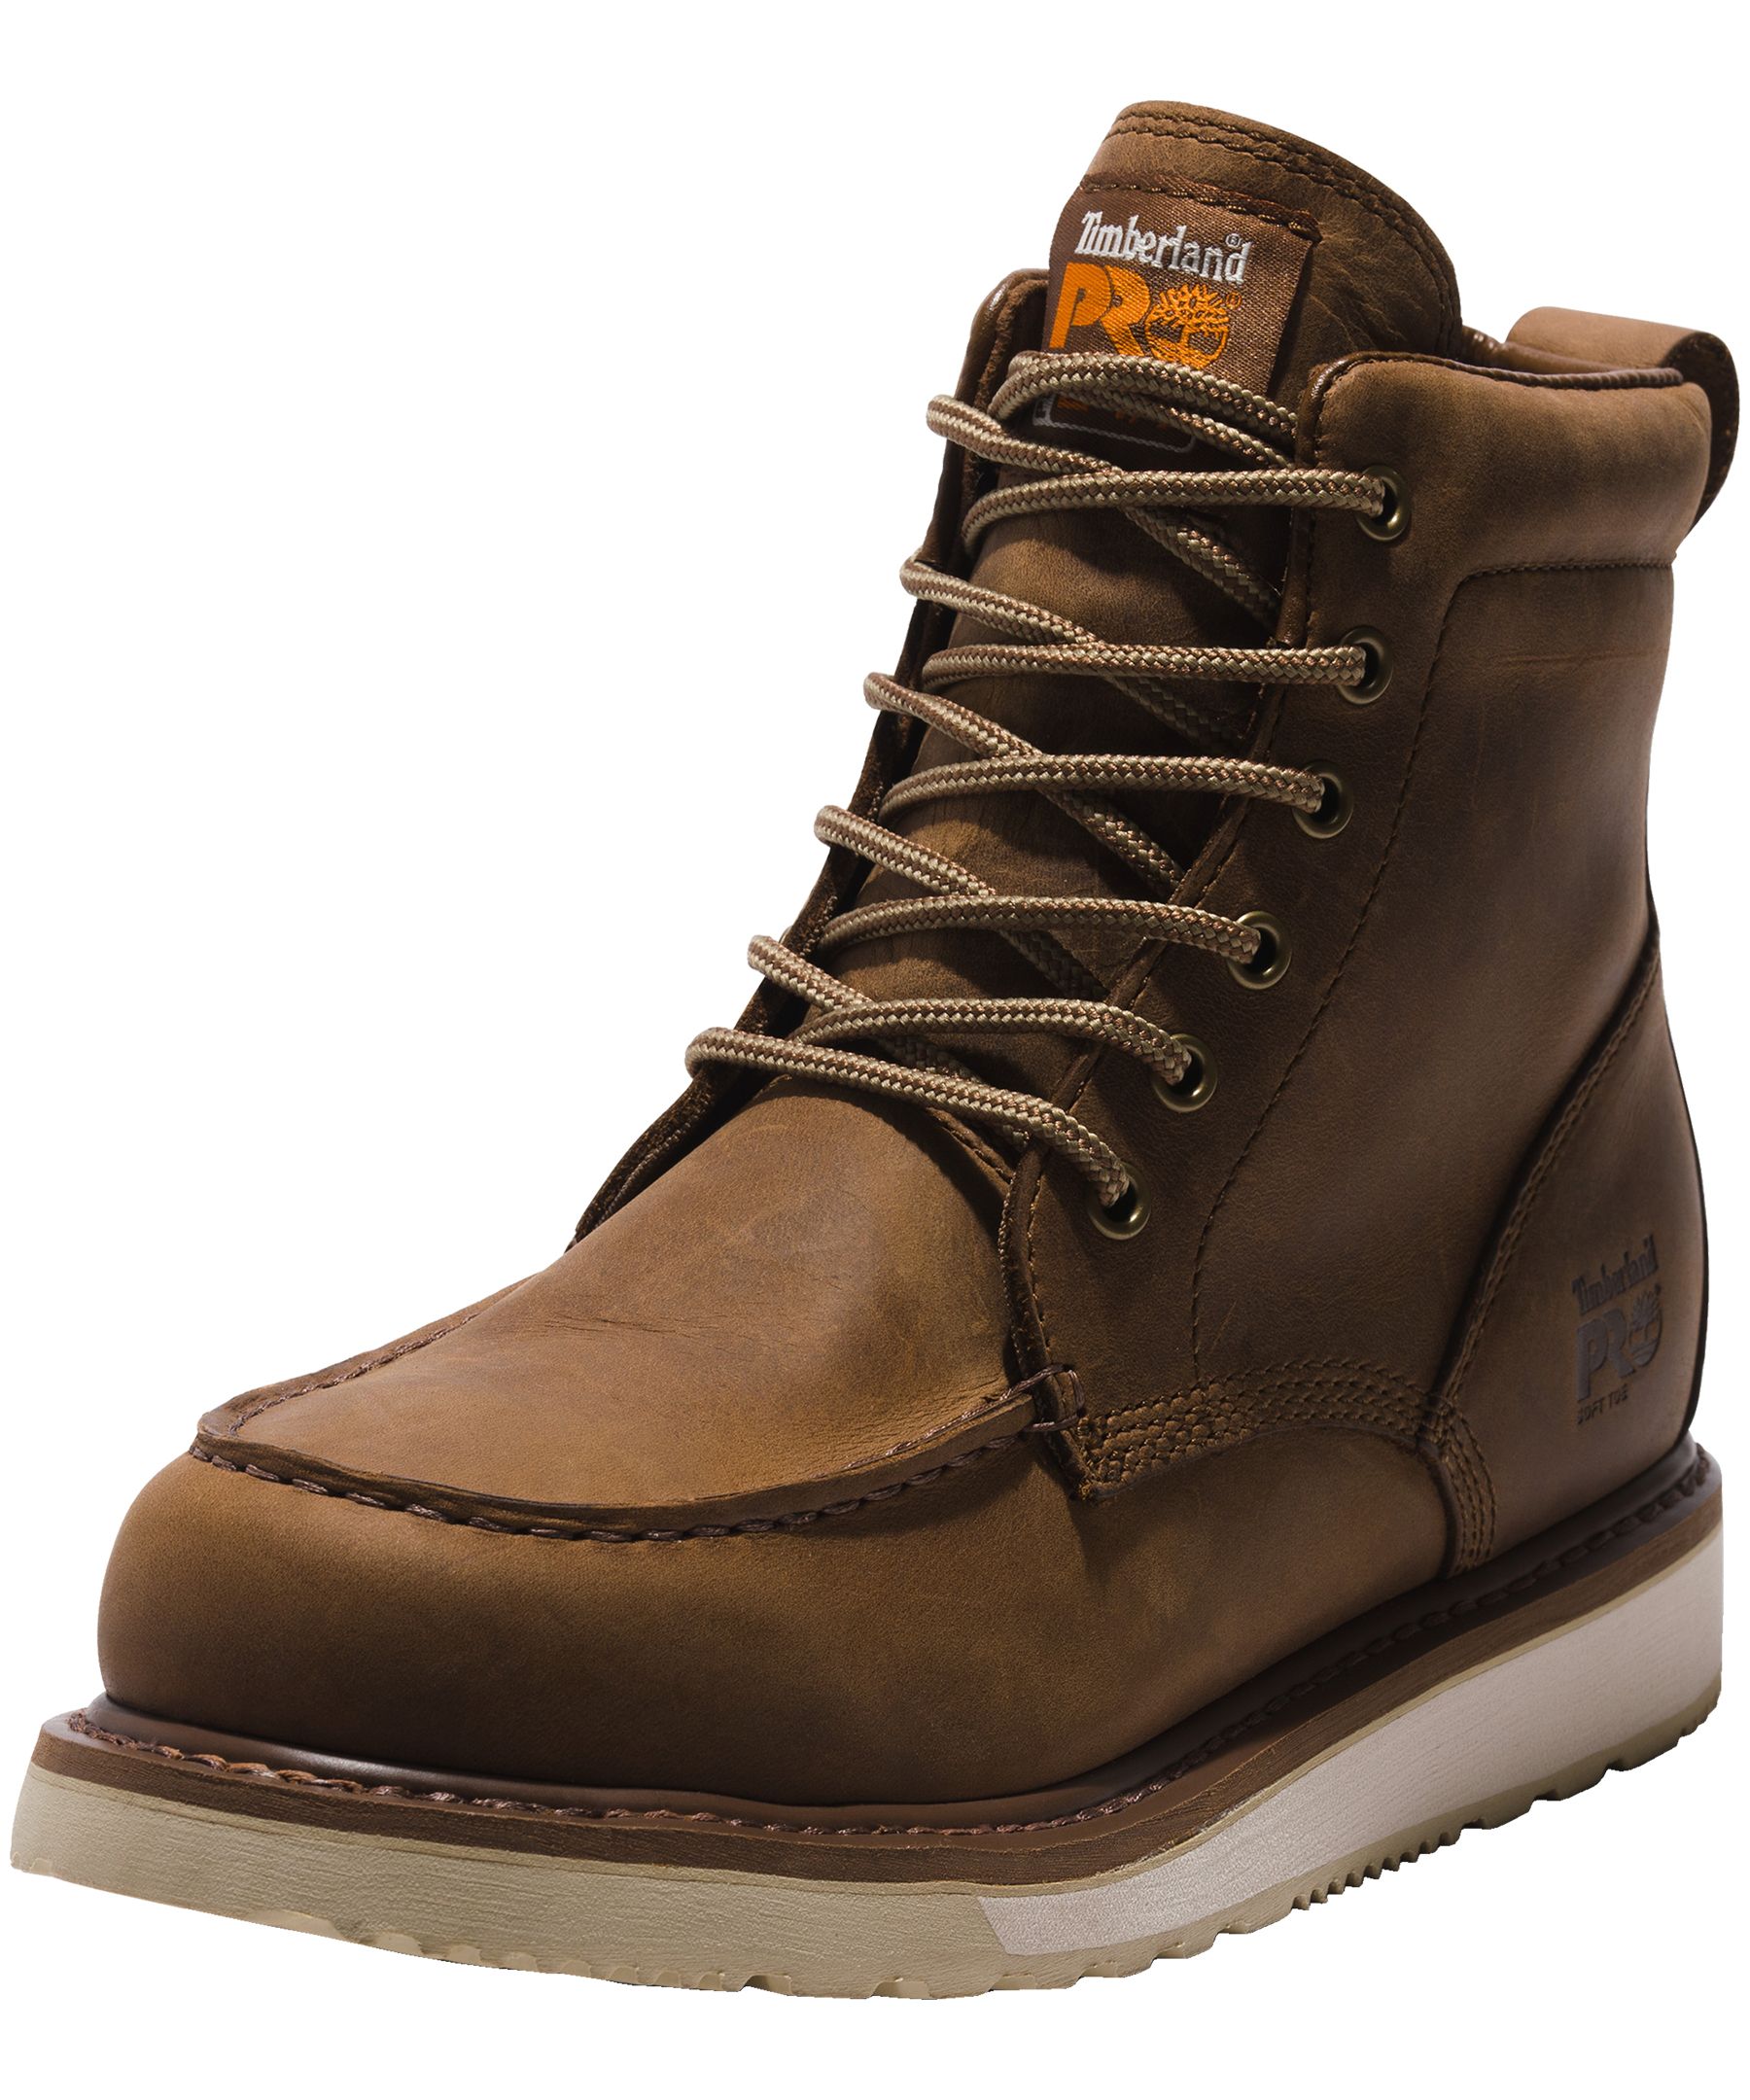 Timberland Pro Men's Soft Toe 6 Inch Wedge Work Boot